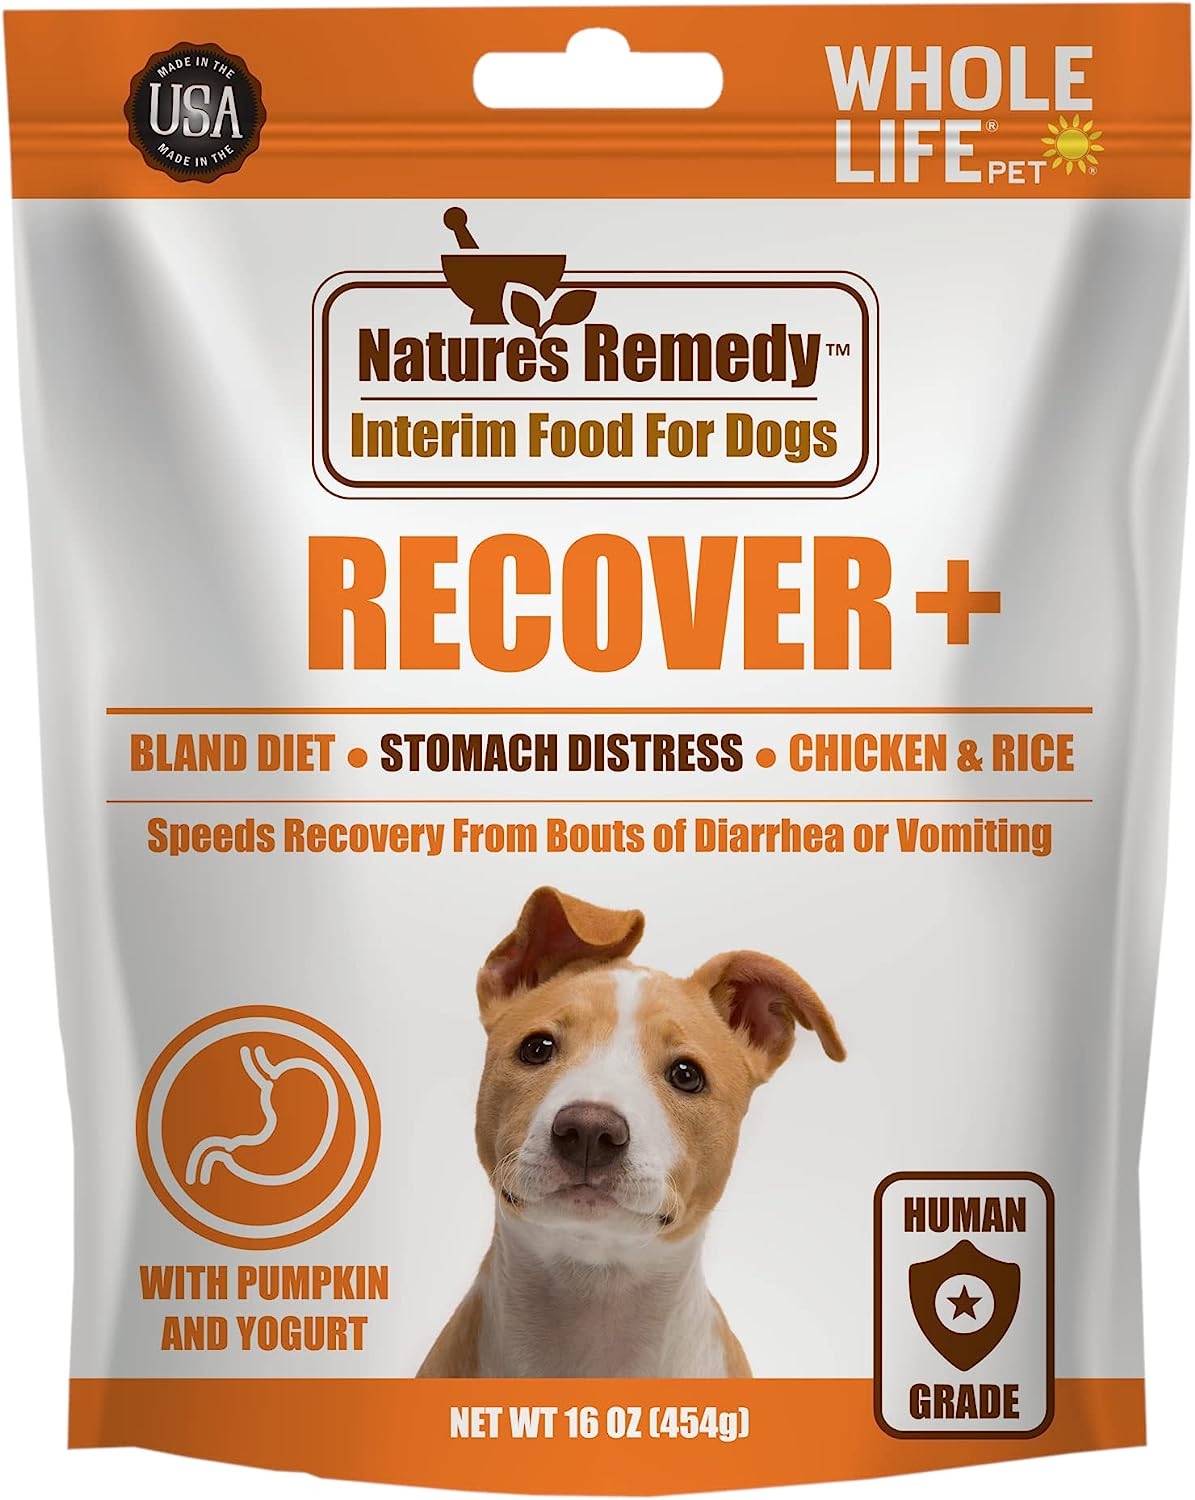 Whole Life Pet Recover. Bland Diet for Dogs – Vomiting, Stomach Distress or Diarrhea Relief. Ready in Minutes – Just Add Water